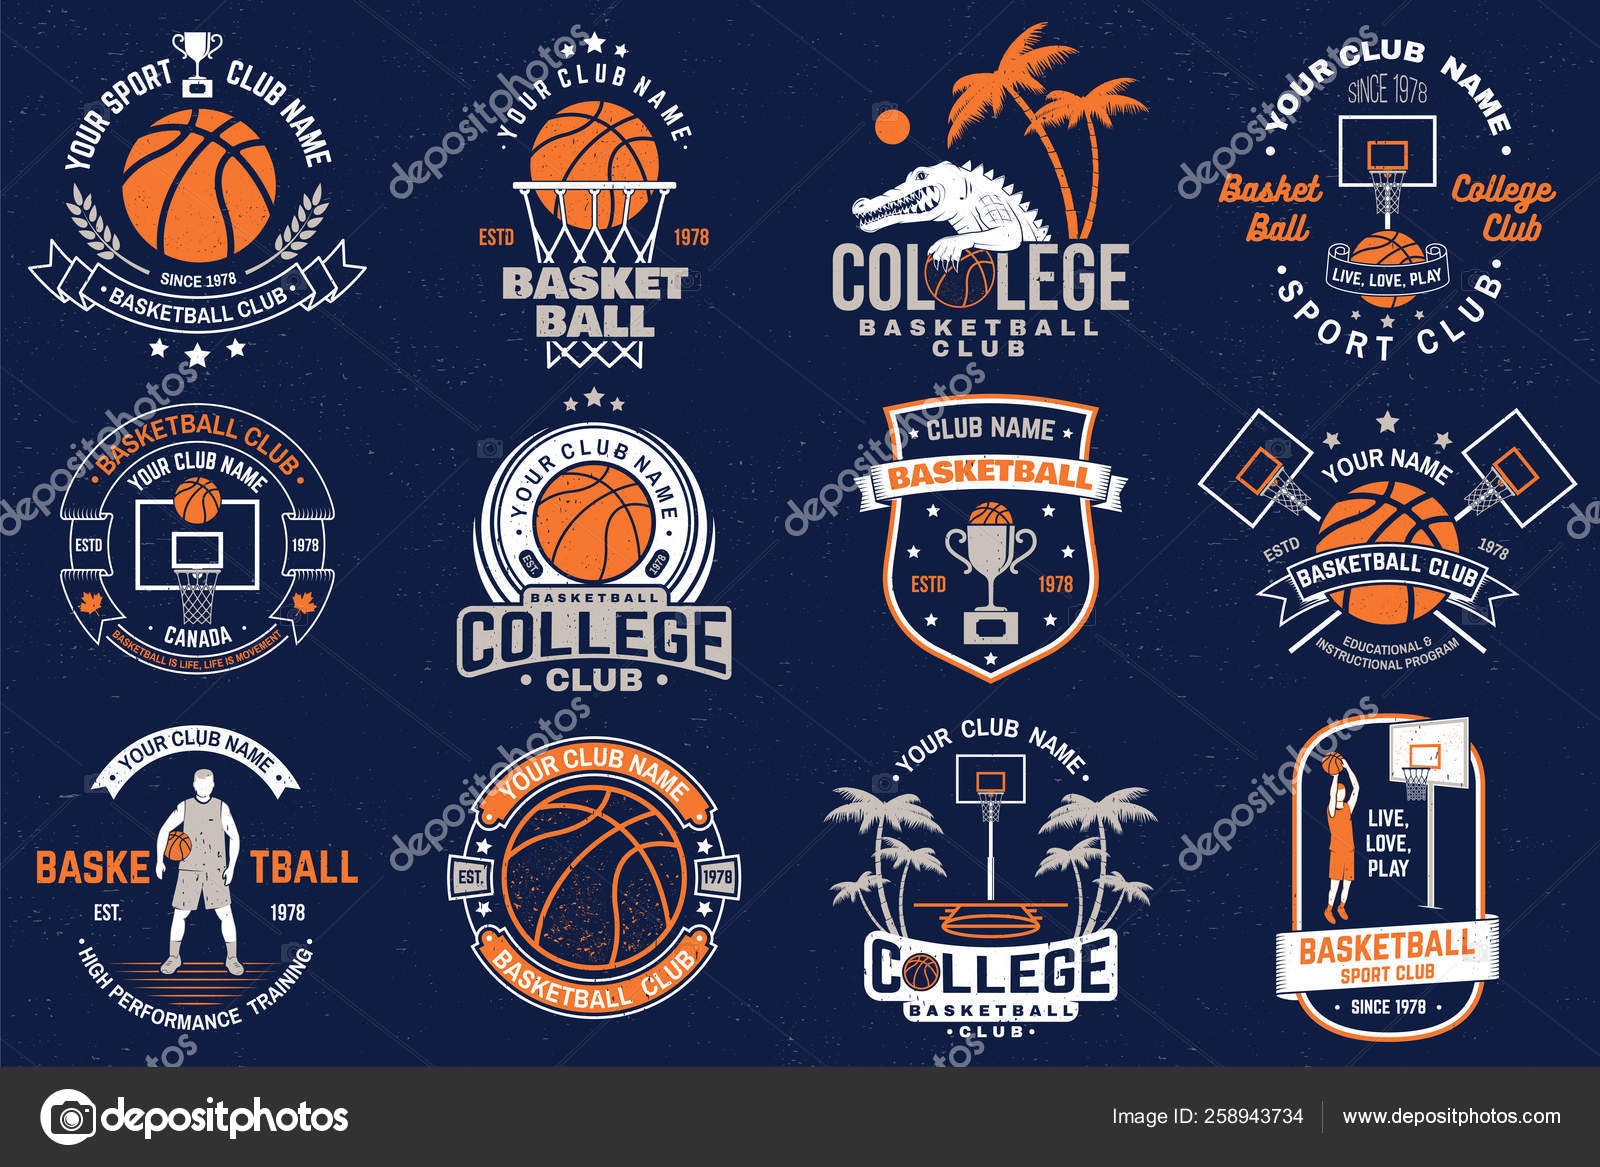 Basketball championship logo design. Graphic design for t-shirt and print  media. Vector and illustration. Stock Vector